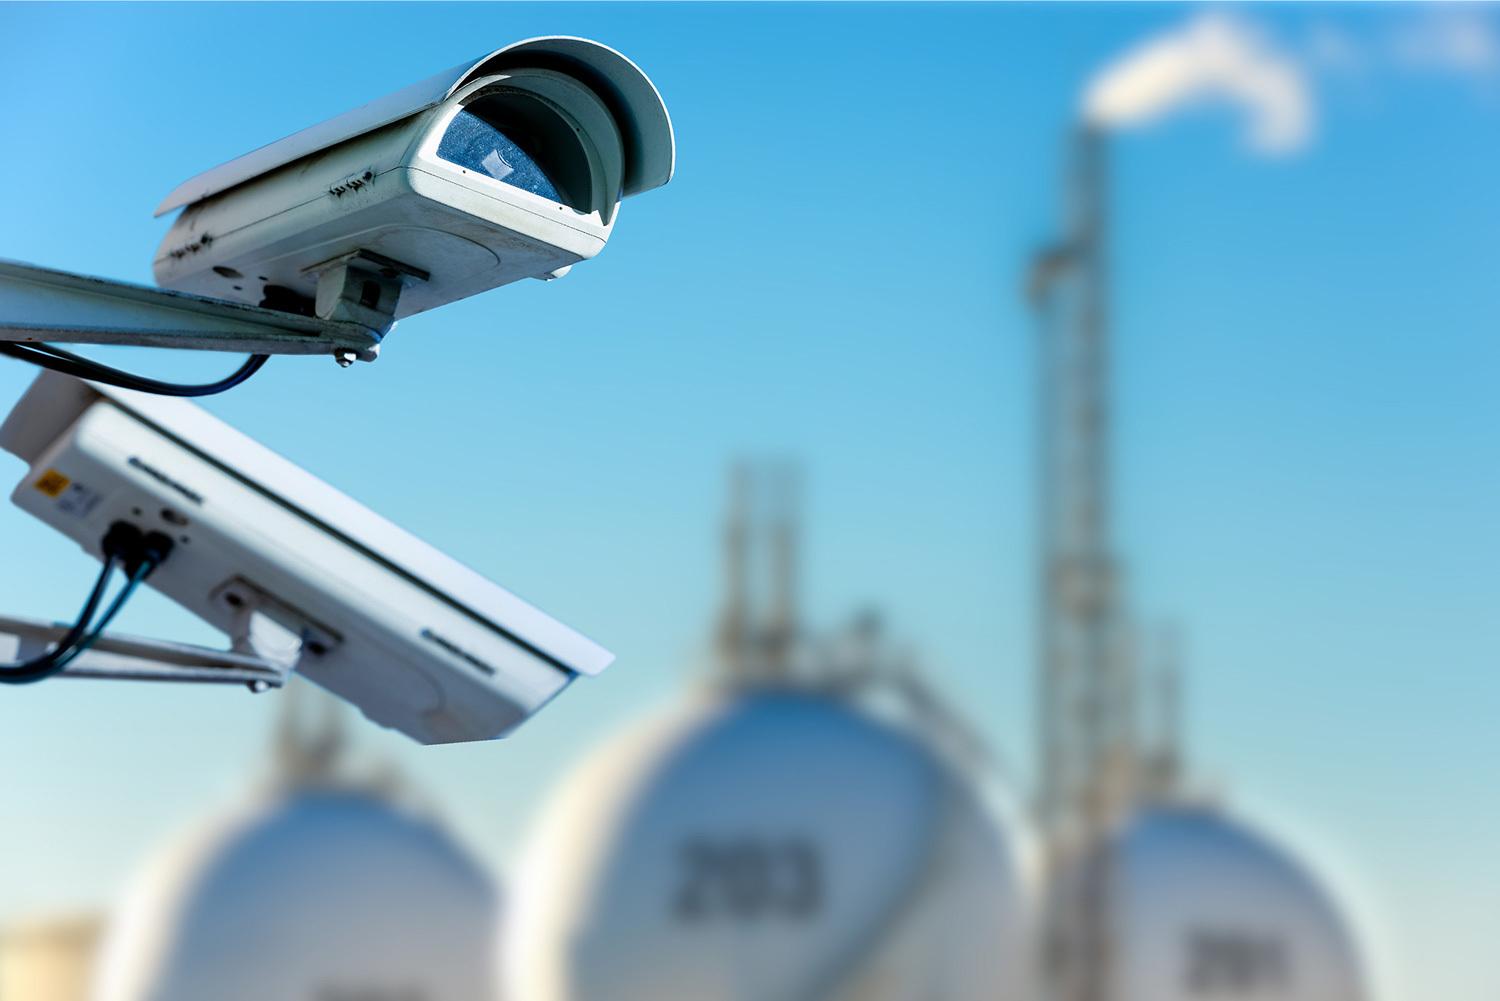 Product Solution | Critical Infrastructure Security | Video surveillance software image